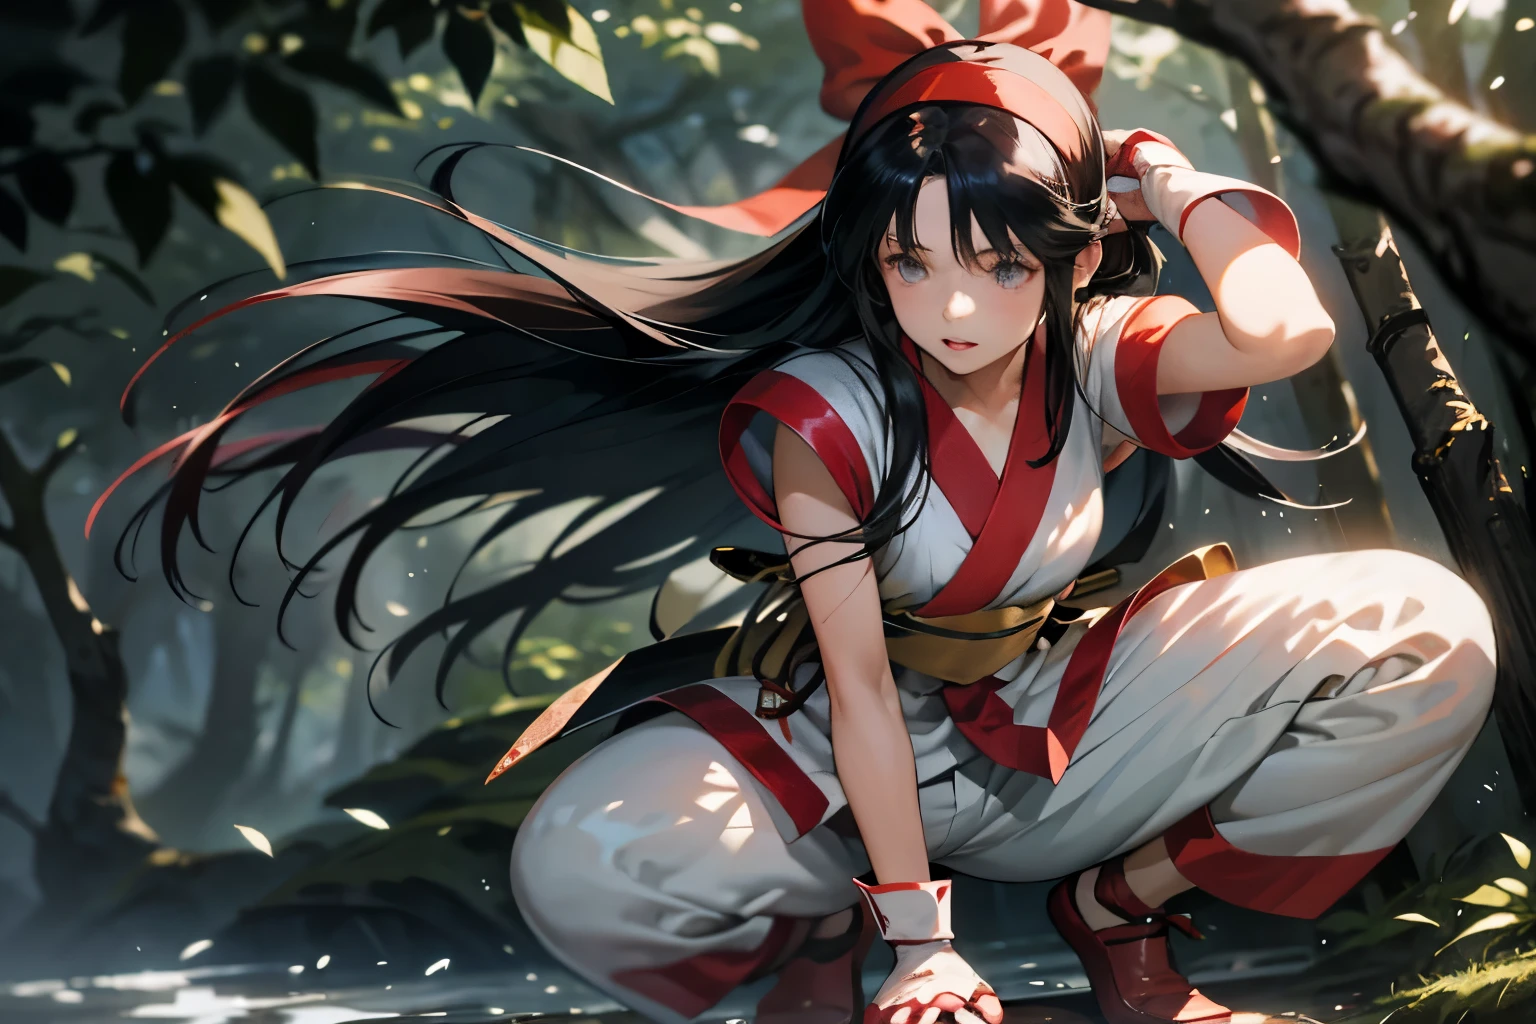 masterpiece、highest quality,1 girl, Nakoruru、long hair, ainu clothes, alone, hair band, black hair, fingerless gloves, short sleeve, gloves, sash, pants, bangs, red hair band, arms, chest, beautiful eyes, white pants, kimono、Nakoruru、full body portrait、M-shaped legs、lewd pose、Sloppy appearance、organi、clothed sex、Forest with a river, High resolution, dramatic lighting and shadow, blurred background、looking at the viewer, dramatic hair,